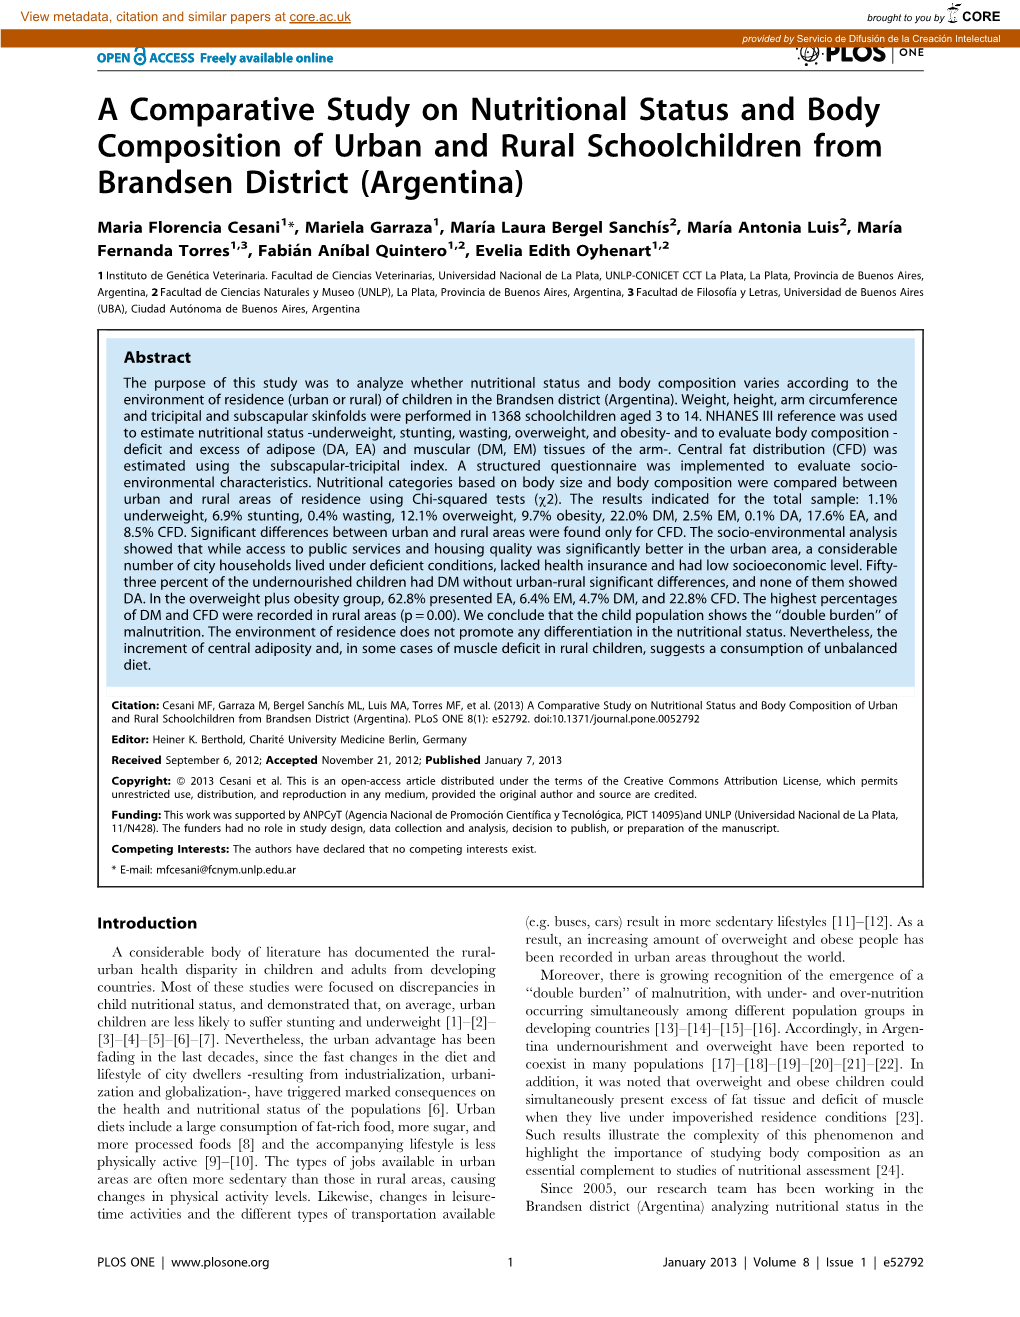 A Comparative Study on Nutritional Status and Body Composition of Urban and Rural Schoolchildren from Brandsen District (Argentina)